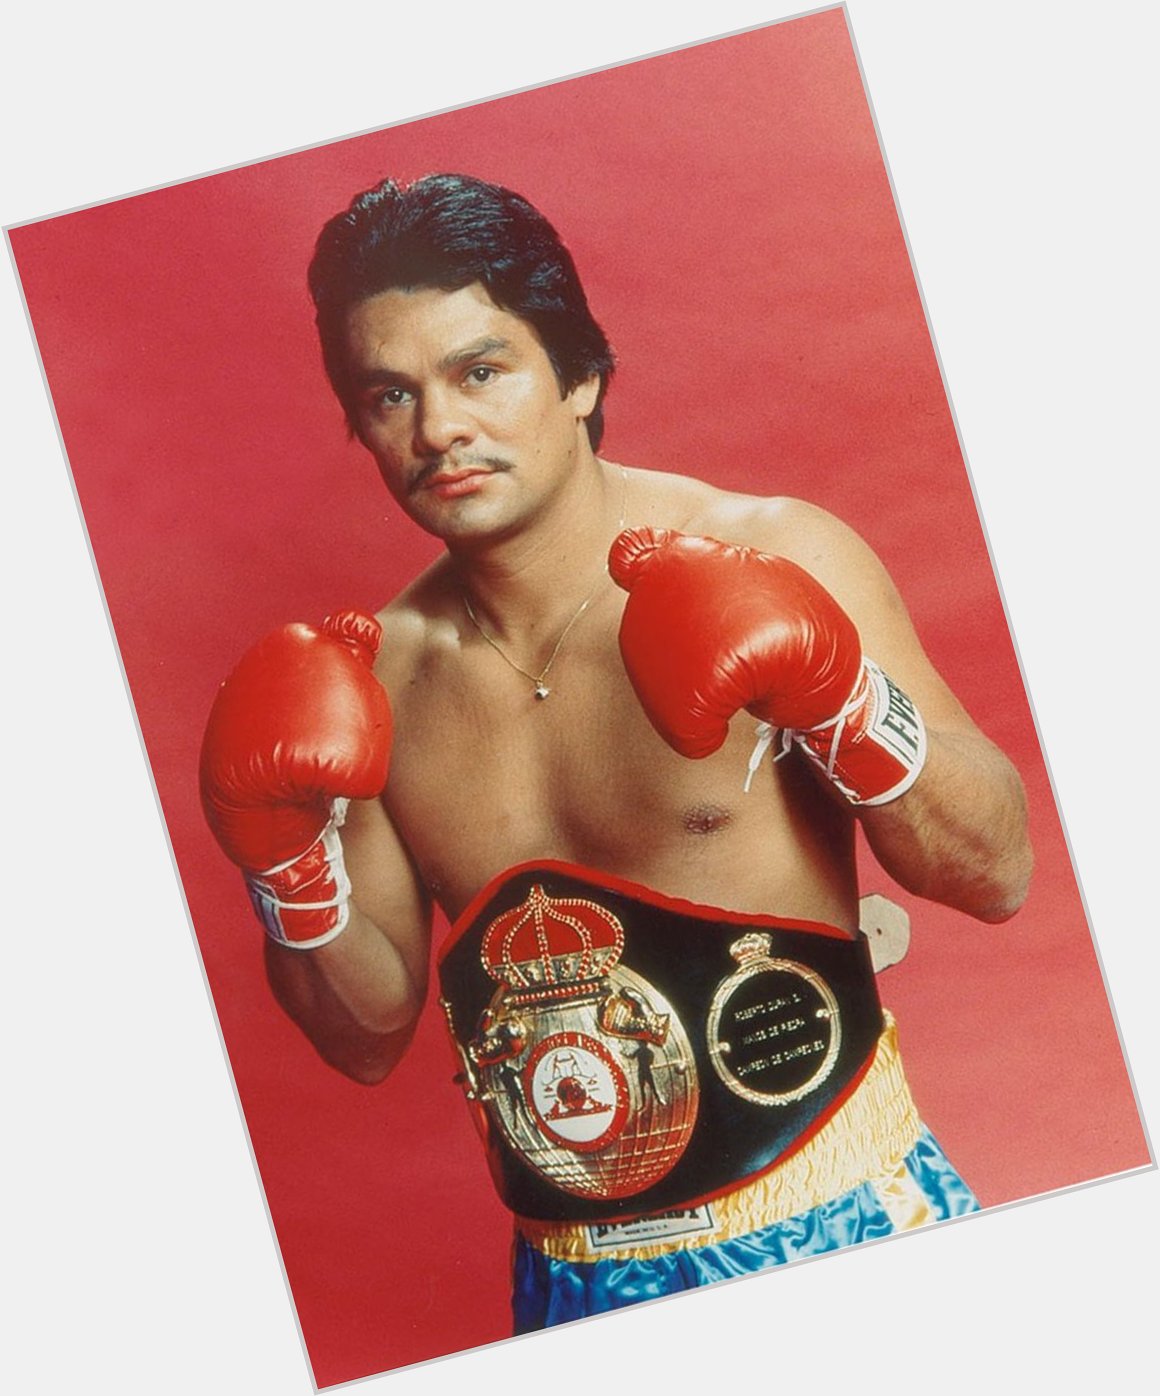 Happy birthday to The greatest lightweight of all time Roberto Duran. One of my all time favourite fighters. 